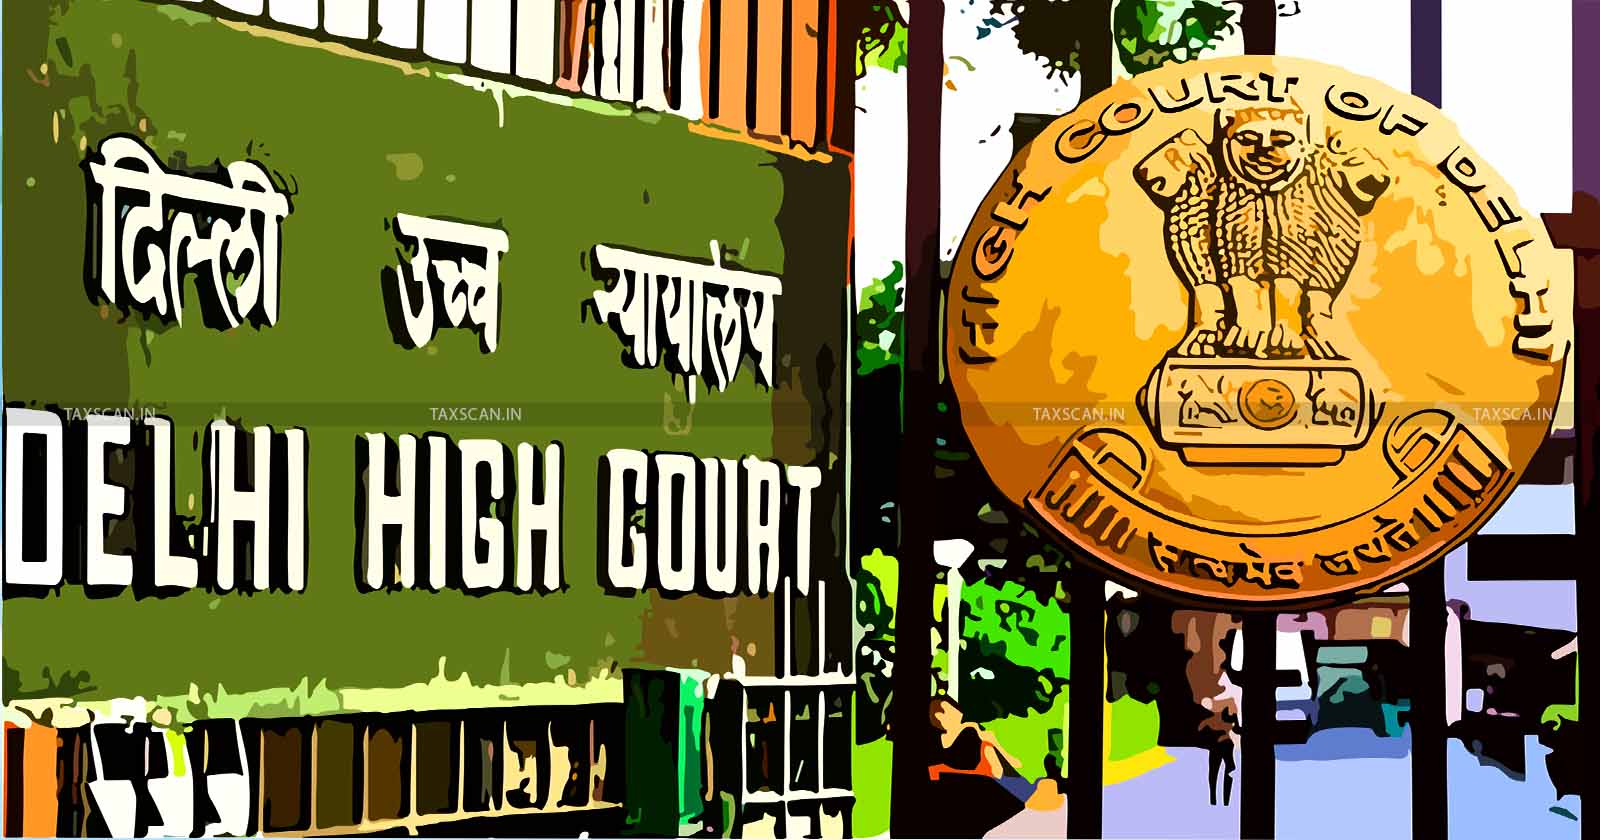 Income Tax Act - Delhi High Court - income tax appeal - taxscan